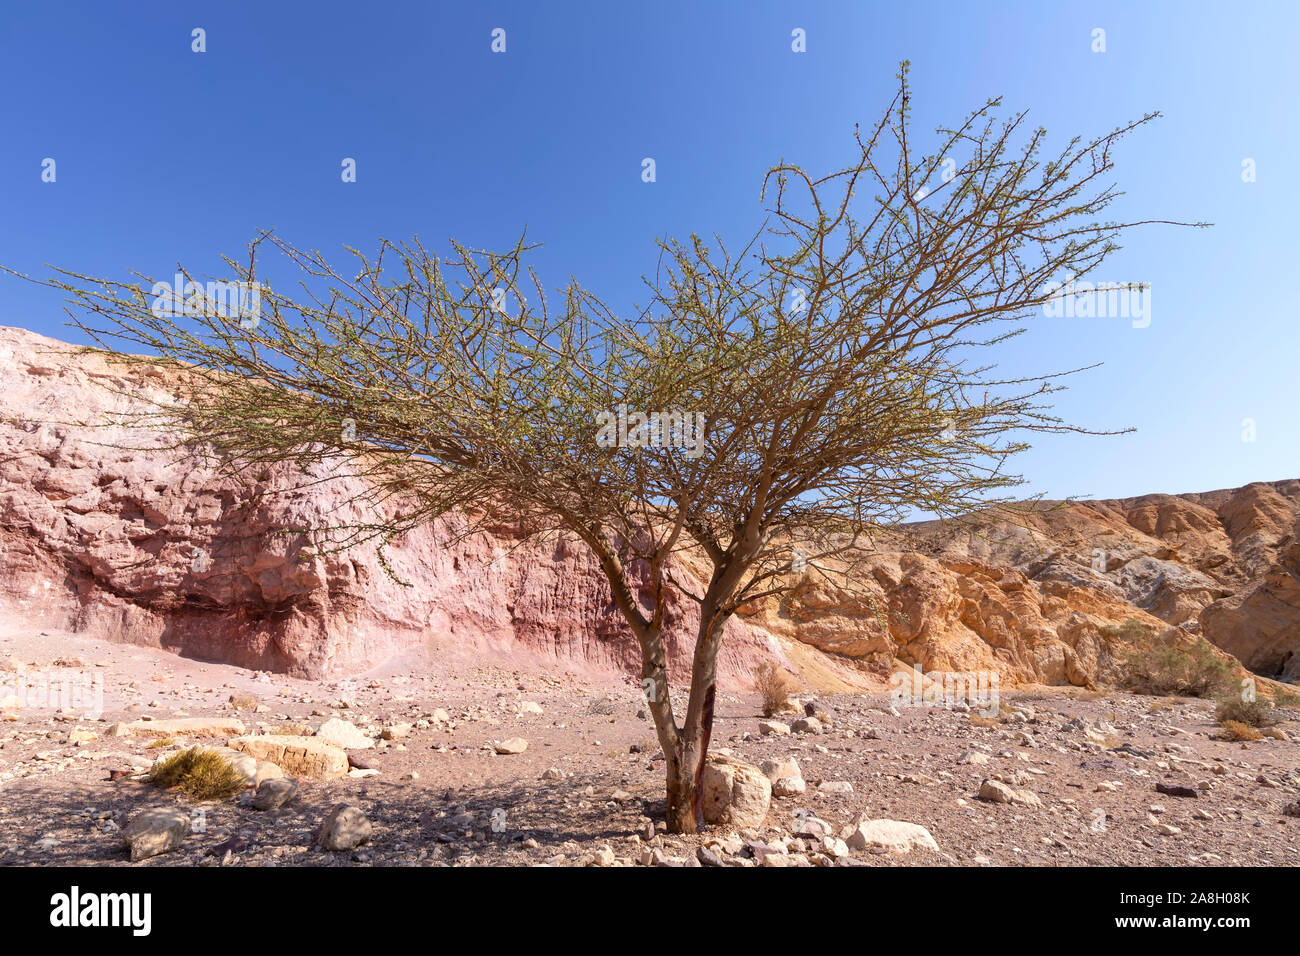 Acacia tree in the Erosive colored hills of the Red Canyon in the Eilat Mountains. Israel Stock Photo